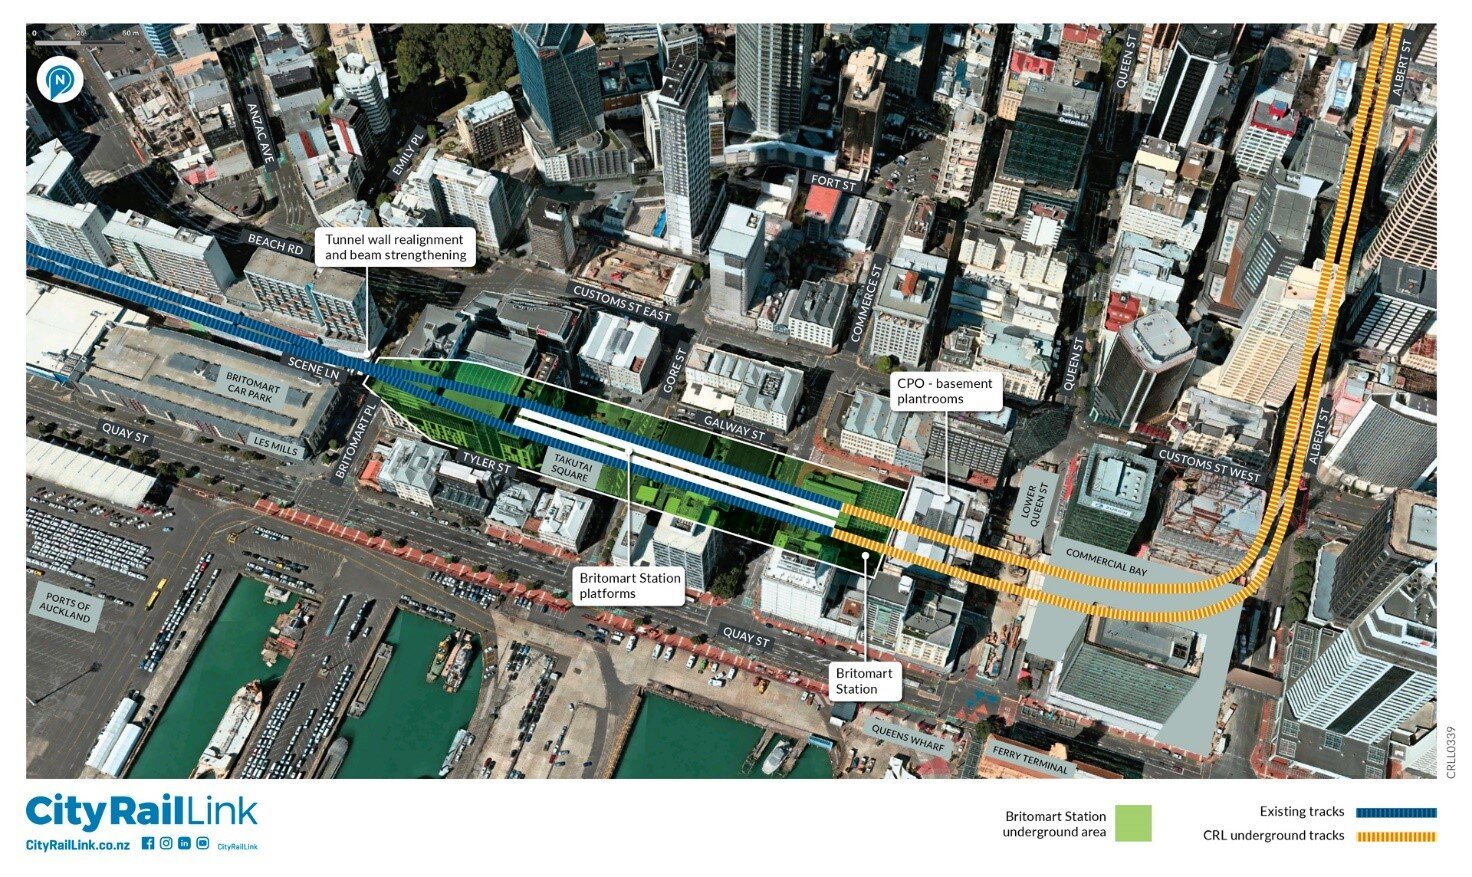  C9 works are mostly centered underground, with only minimal above ground impacts at Britomart Place and Tyler Street. 